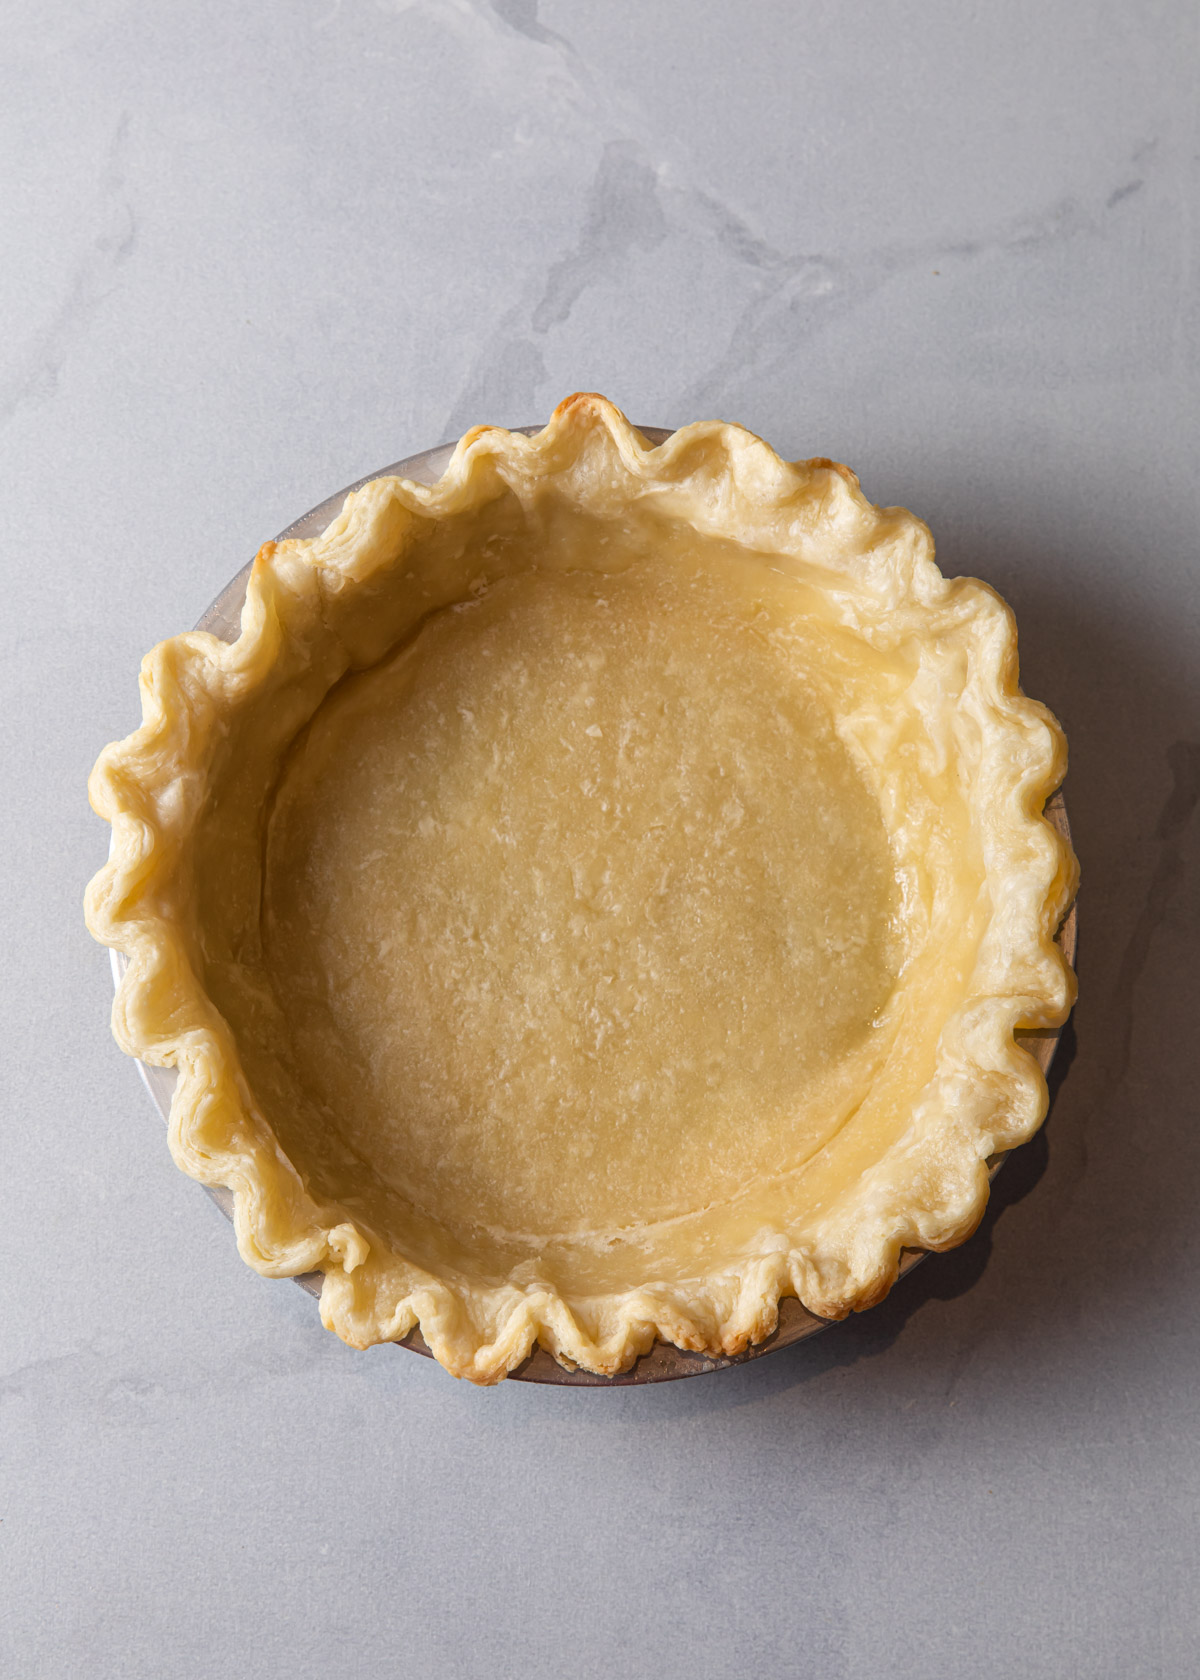 A partially baked pie crust